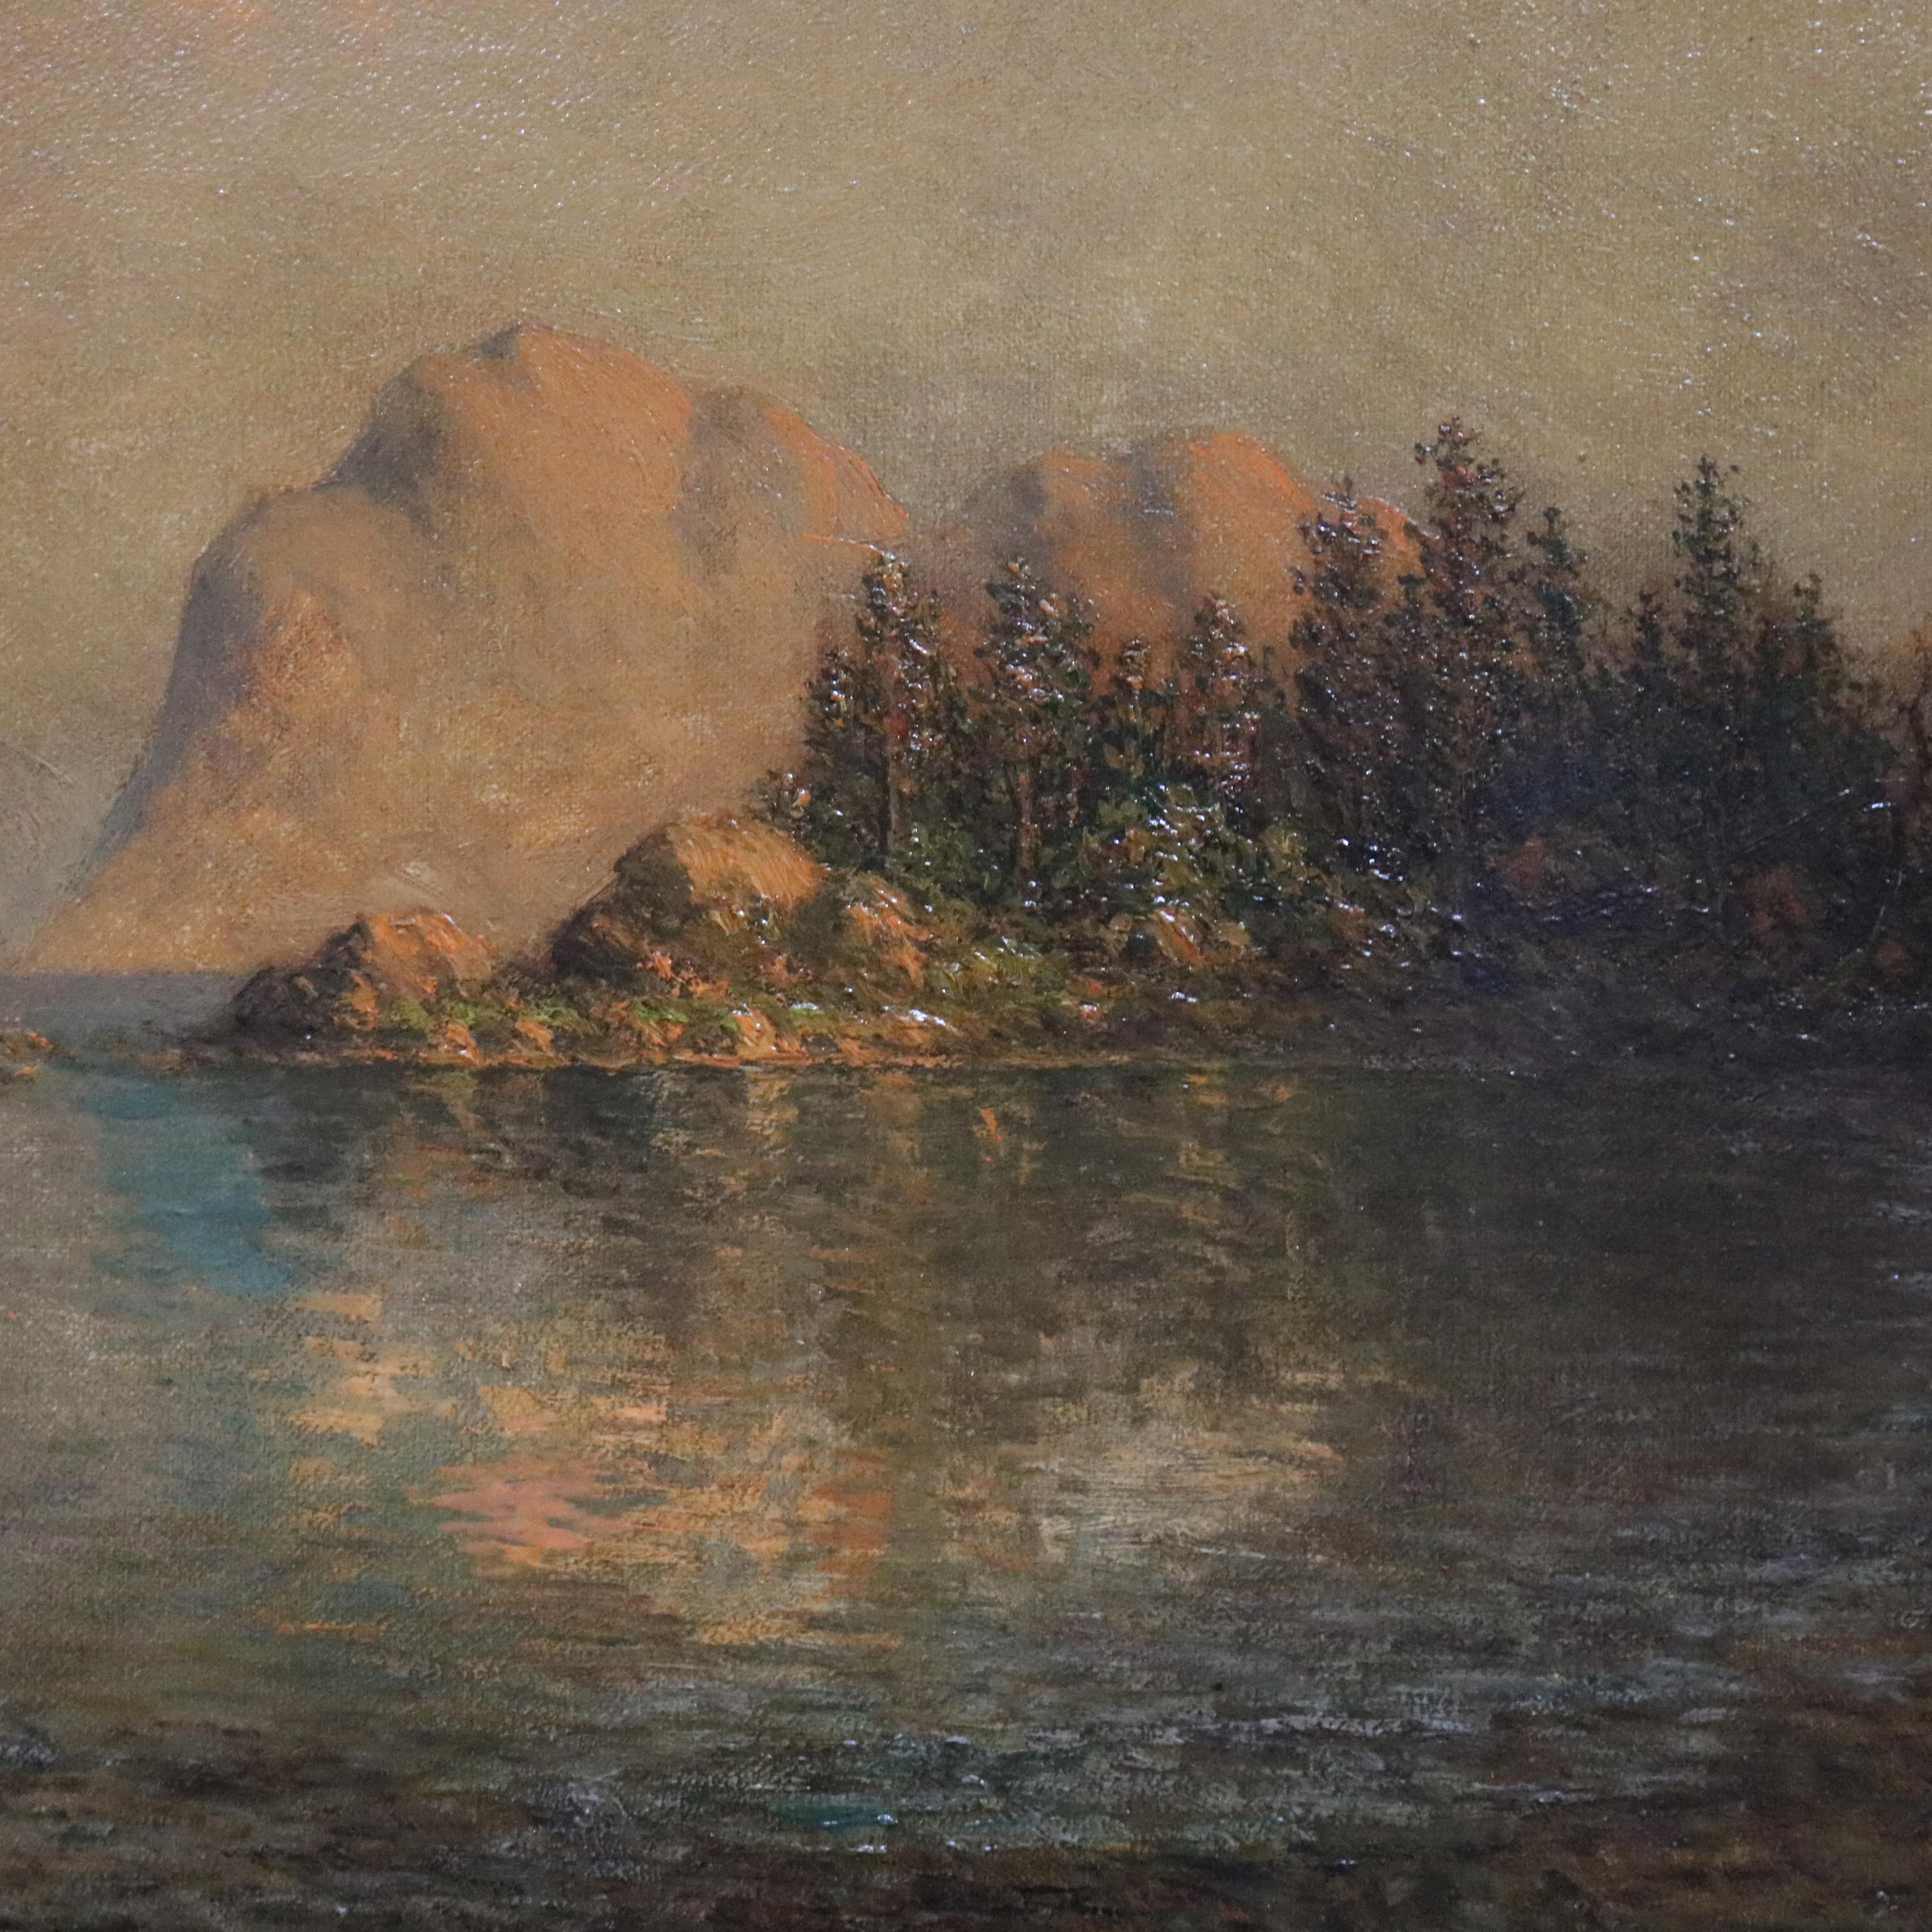 Hand-Painted Antique Coastal Oil on Canvas Painting by John Olsen Hammerstad, Circa 1900